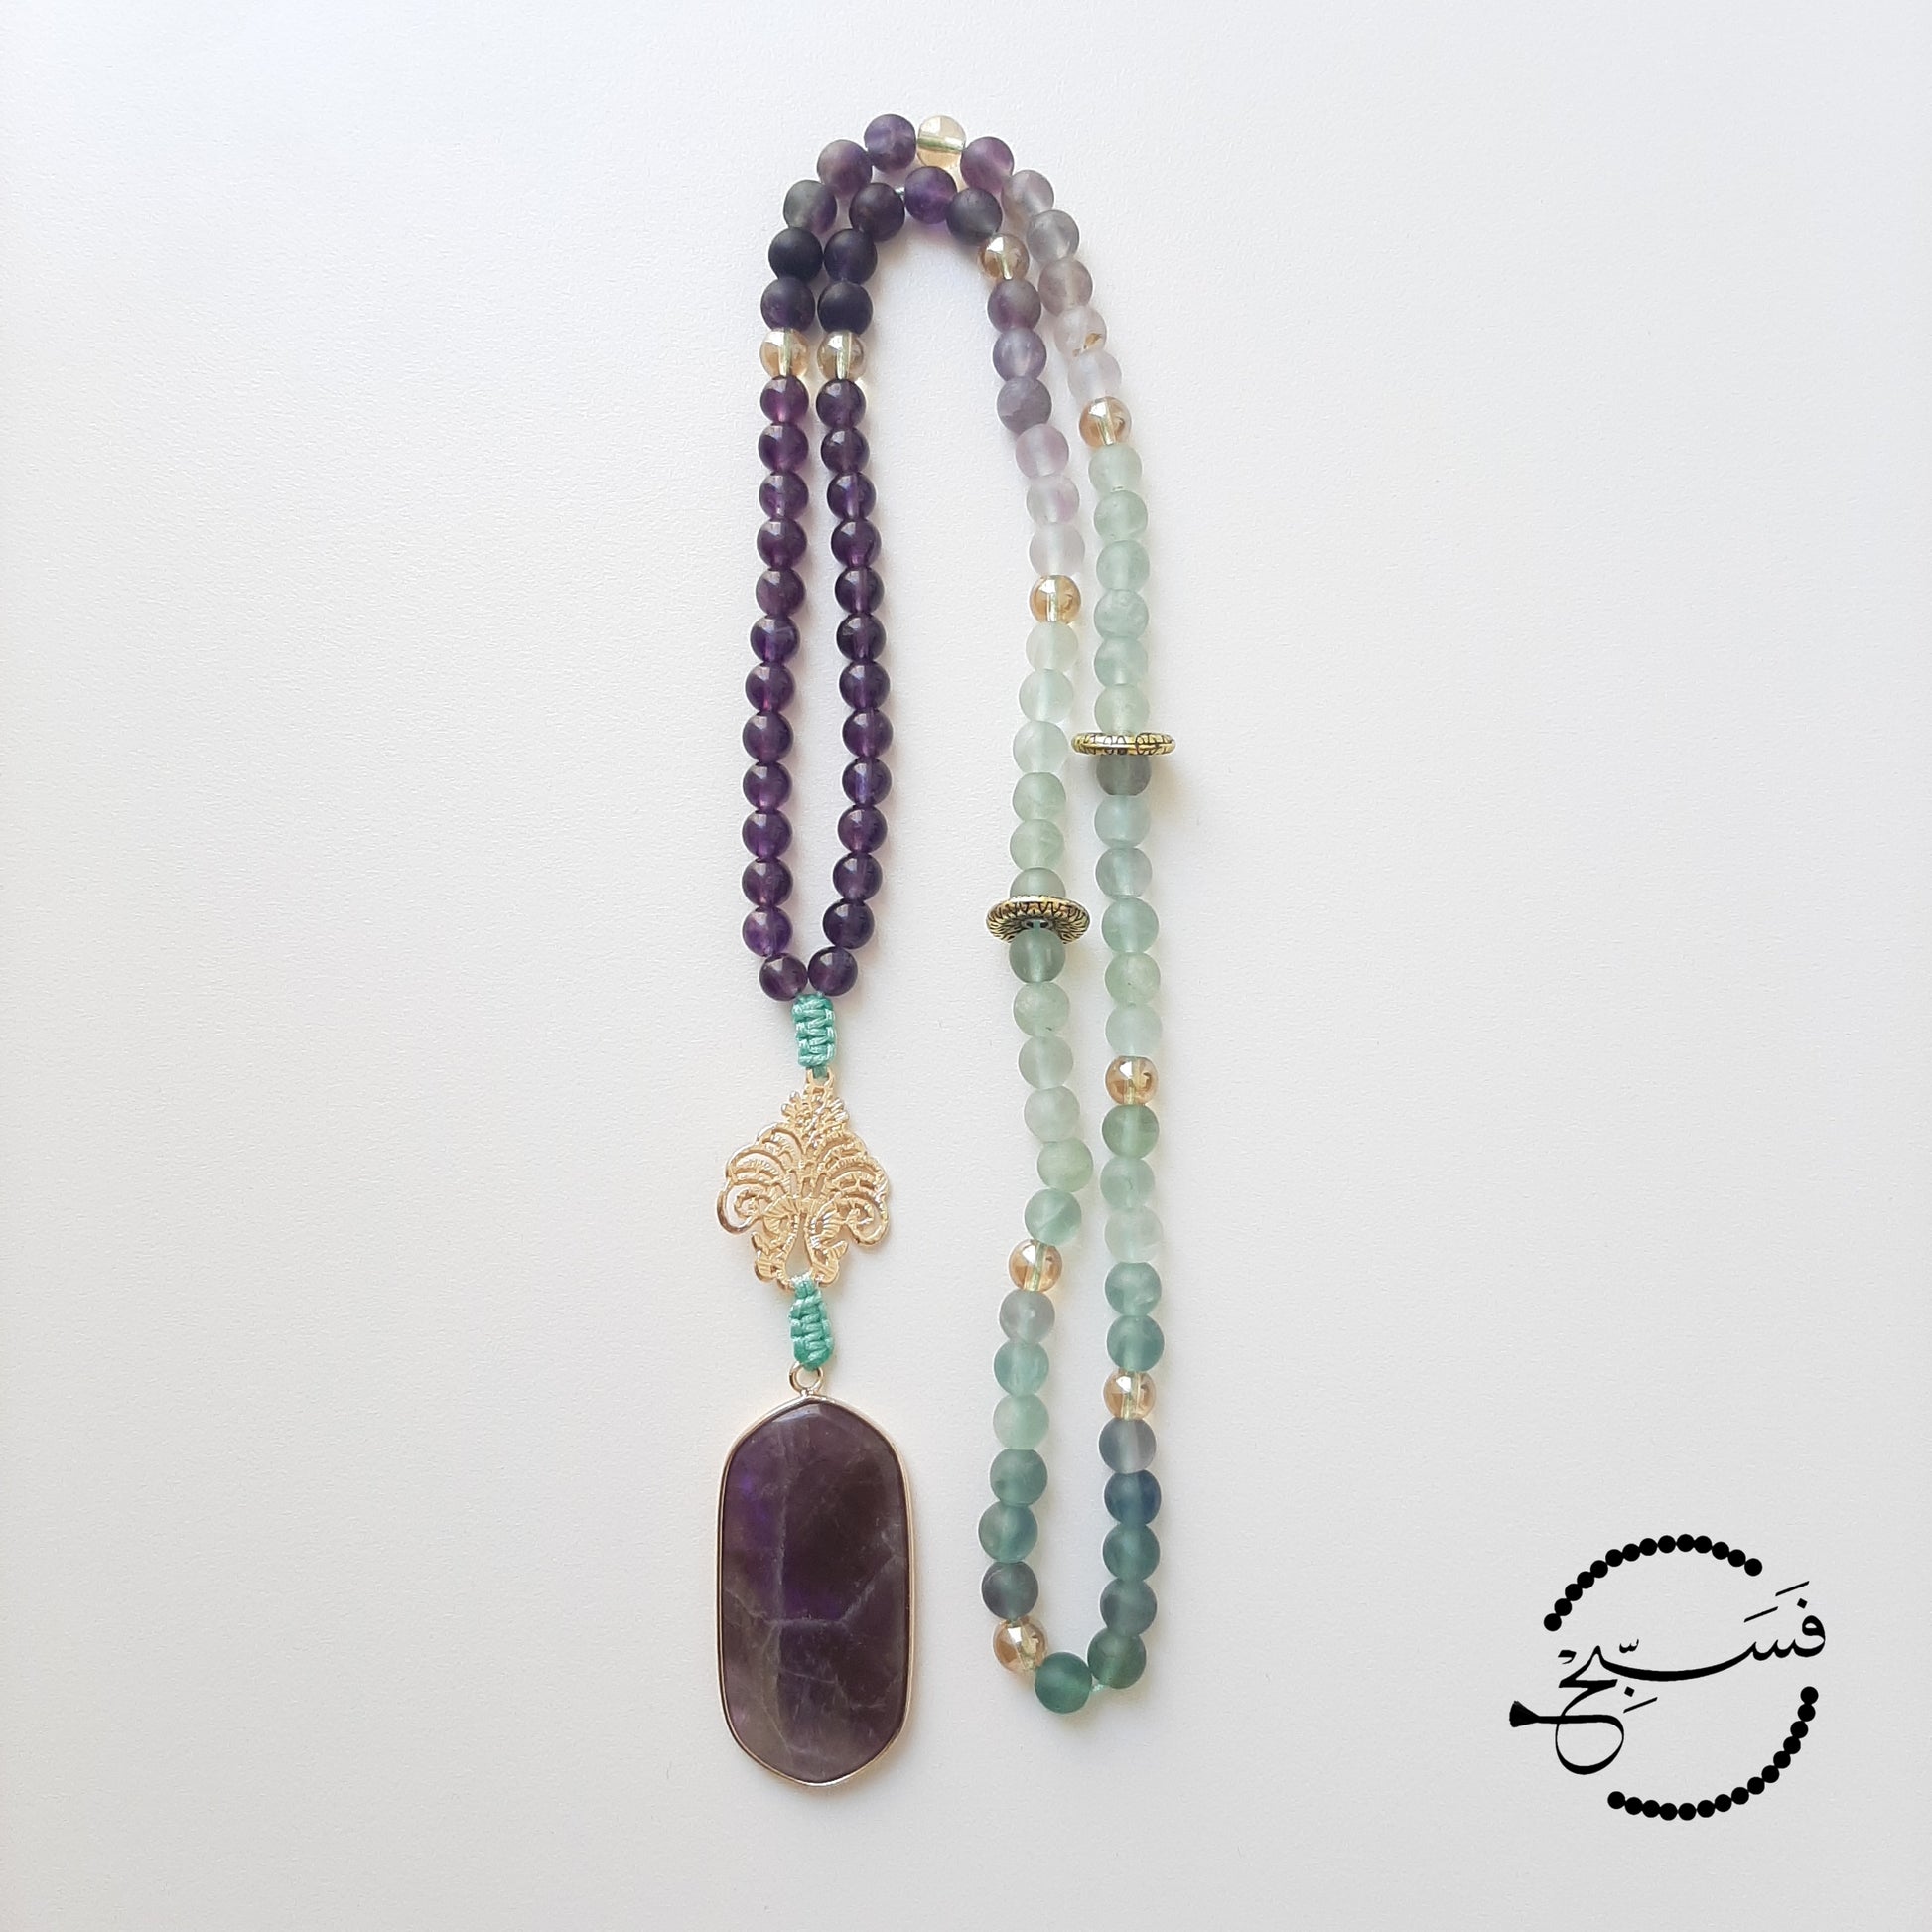 Amethyst pendant, with a mix of stunning amethyst and fluorite beads.   Packaged in a luxurious pouch and a gift box.  99 beads